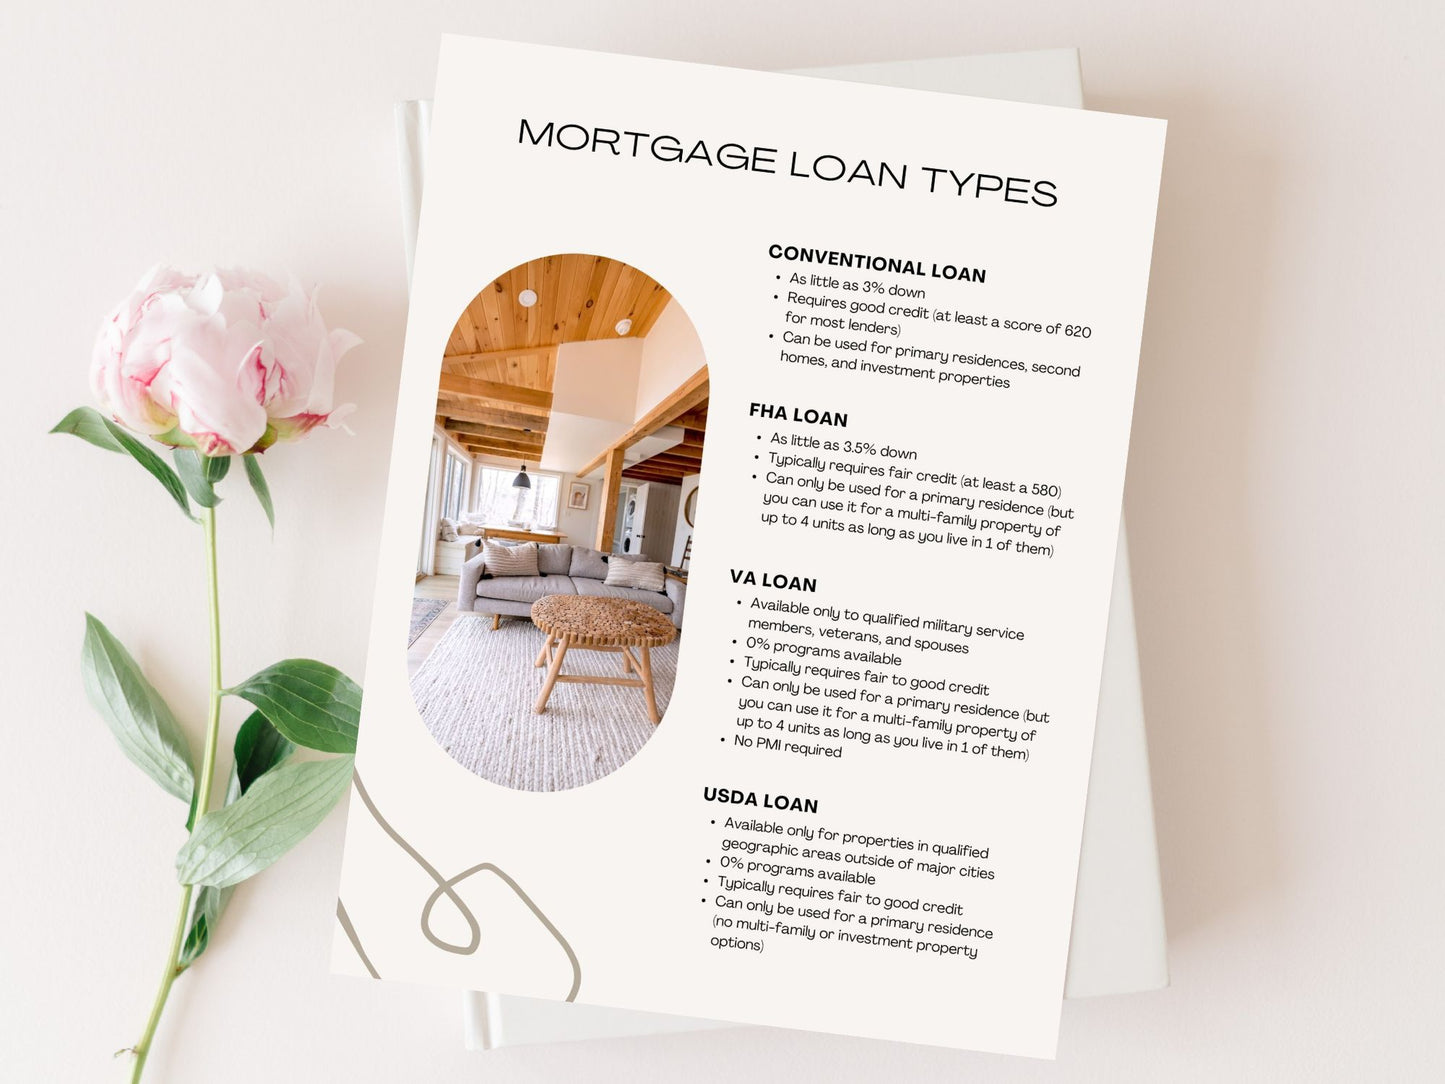 Real Estate Luxury Mortgage Loan Types - Informative guide for exploring upscale financing options in the luxury real estate market.